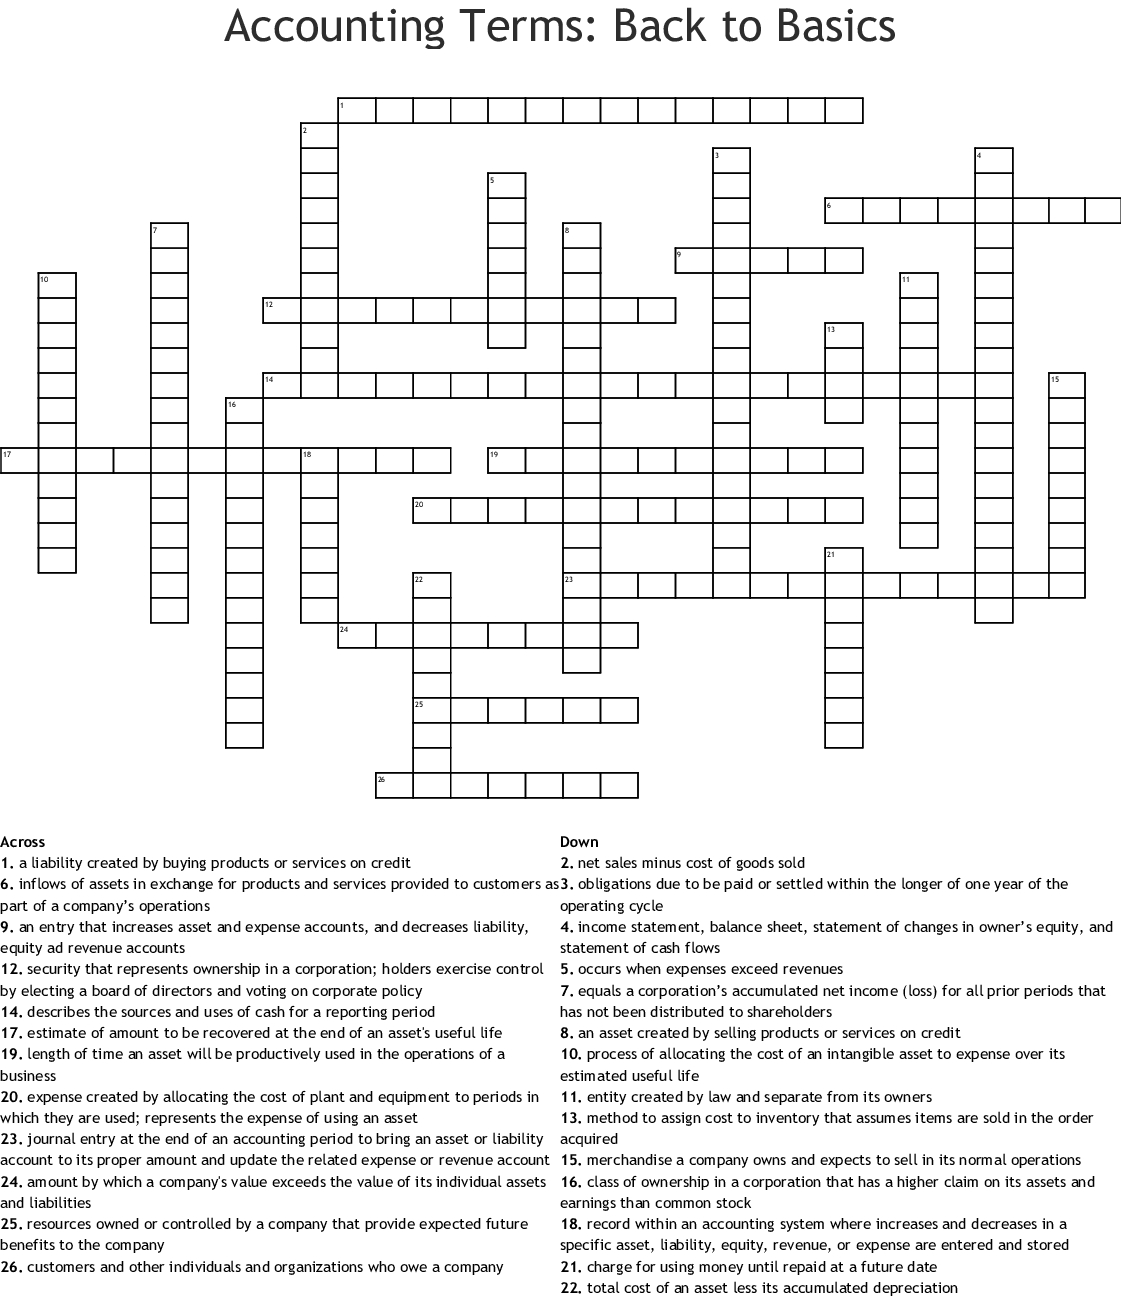 Accounting Terms: Back To Basics Crossword - Wordmint - Free Printable Accounting Crossword Puzzles